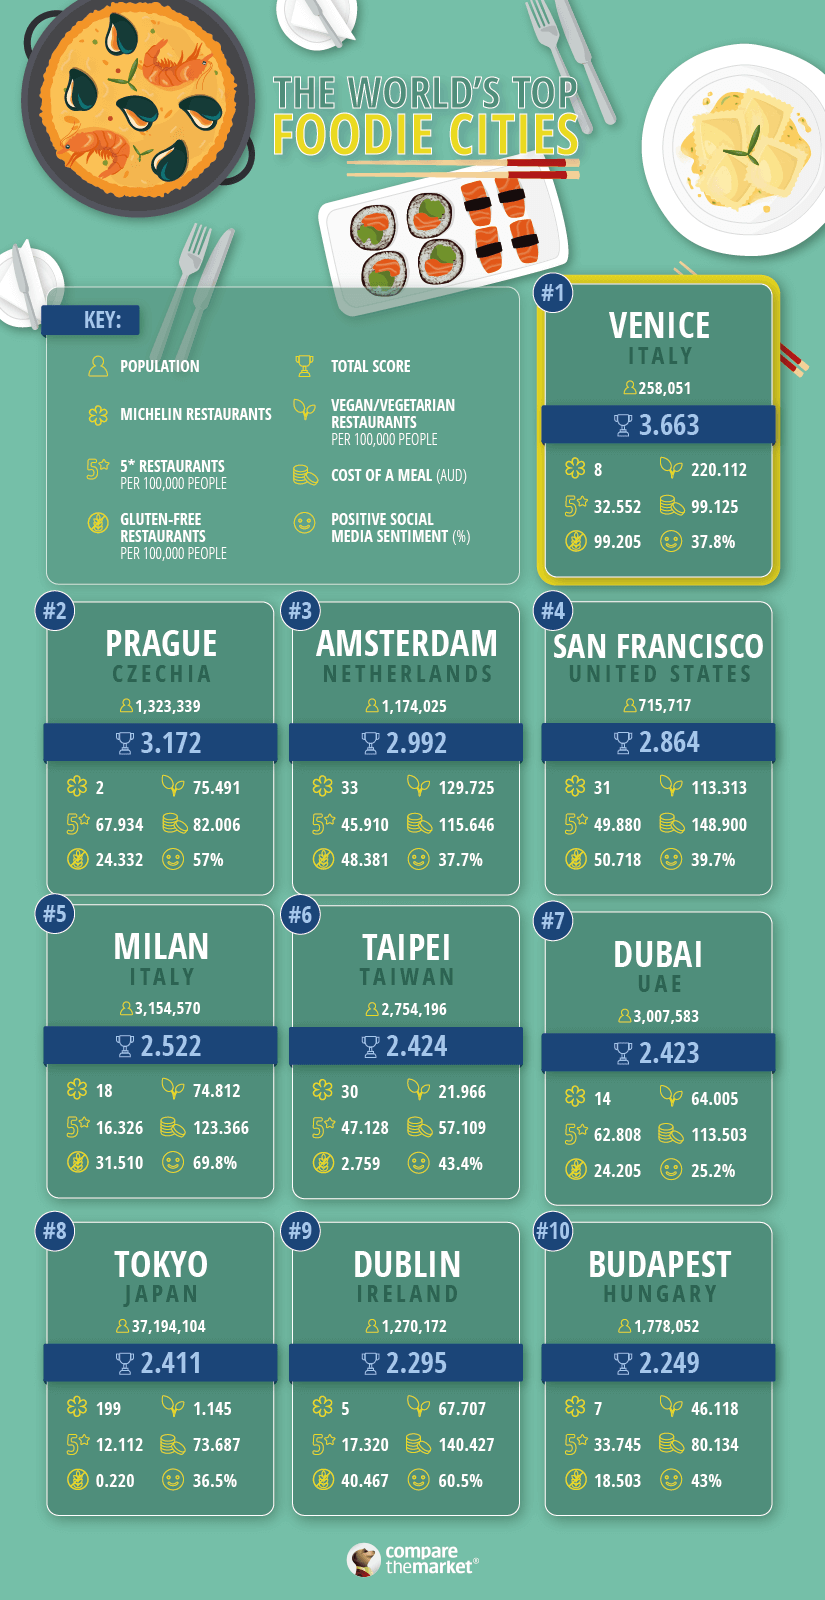 Image showing the top 10 cities around the world that are considered foodie hotspots.